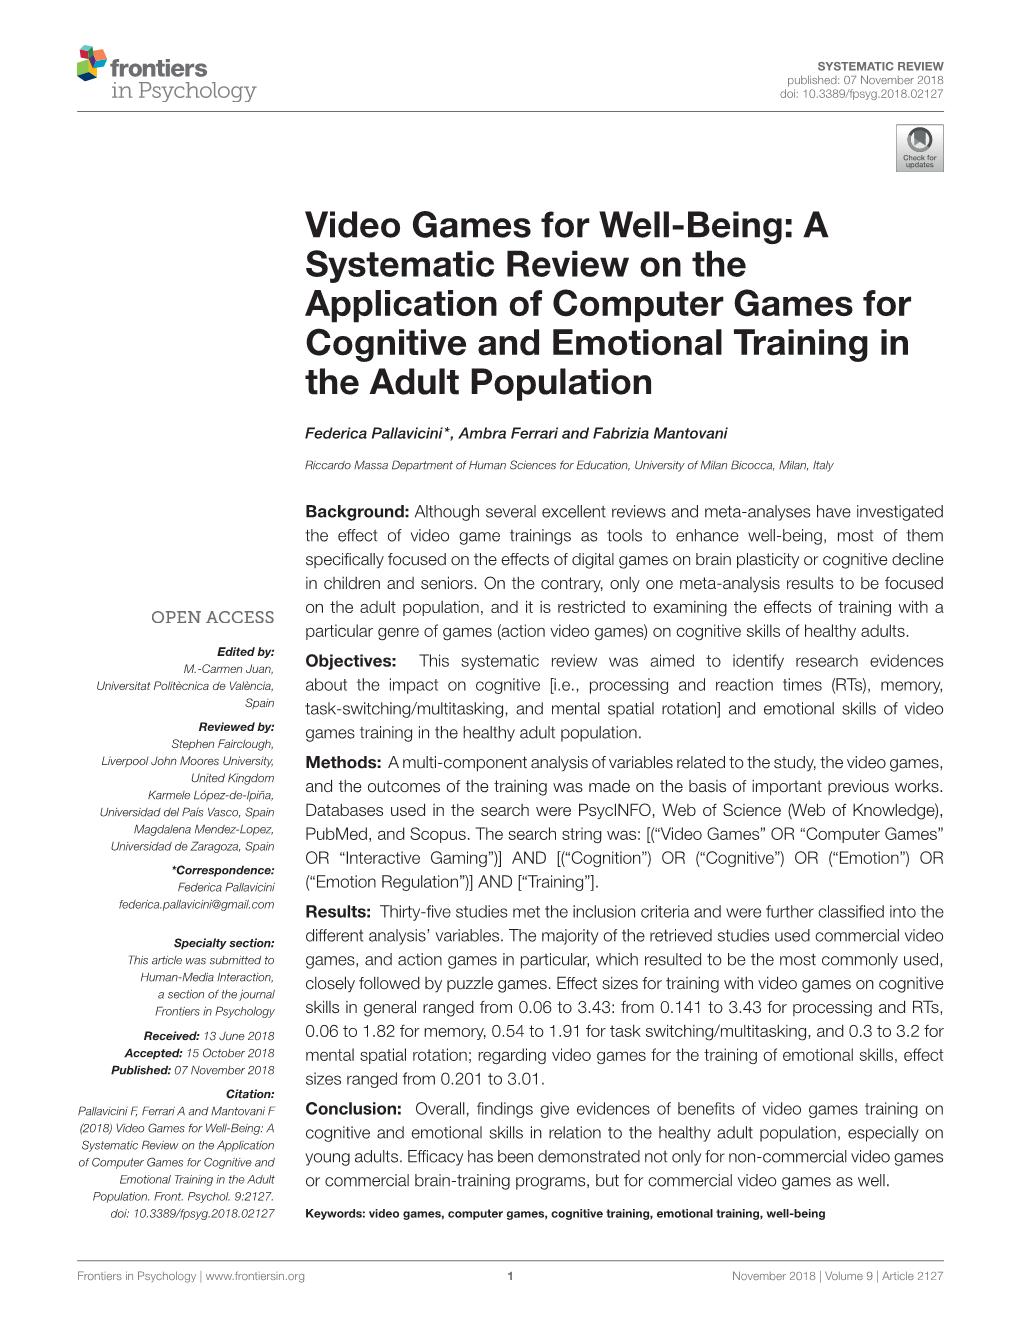 Video Games for Well-Being: a Systematic Review on the Application of Computer Games for Cognitive and Emotional Training in the Adult Population